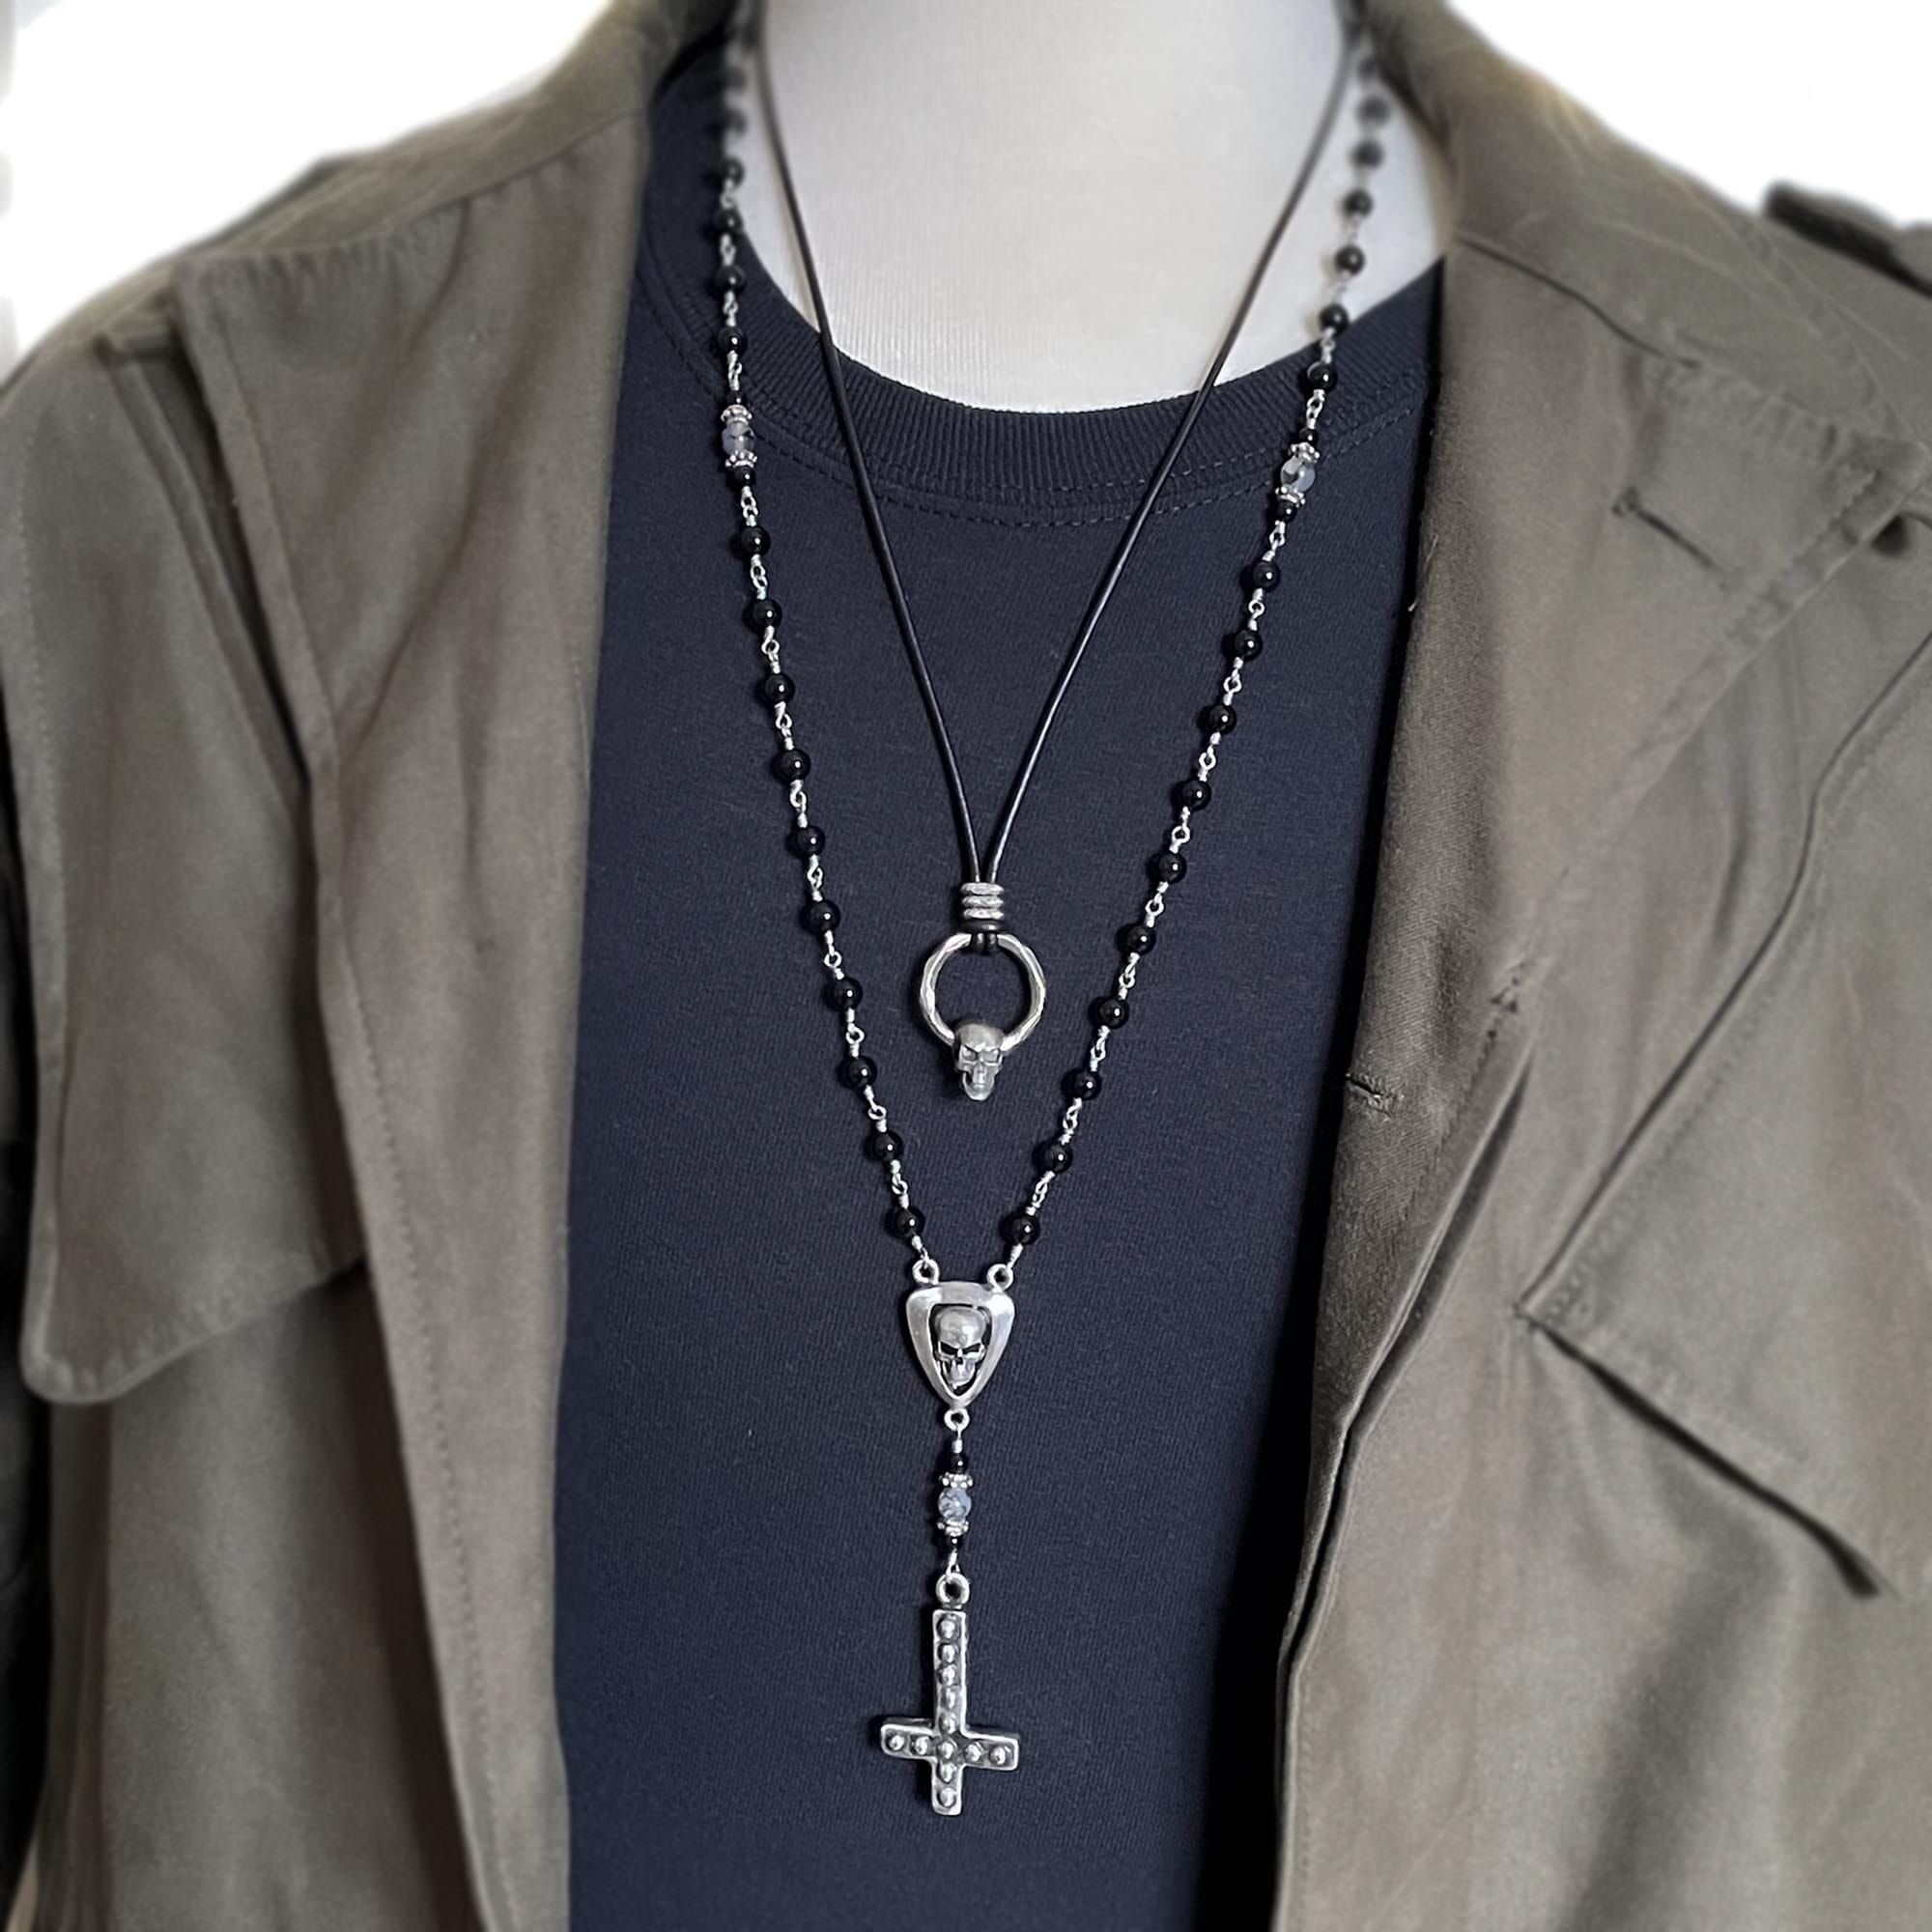 rock n roll rosary necklace for men by rock my wings